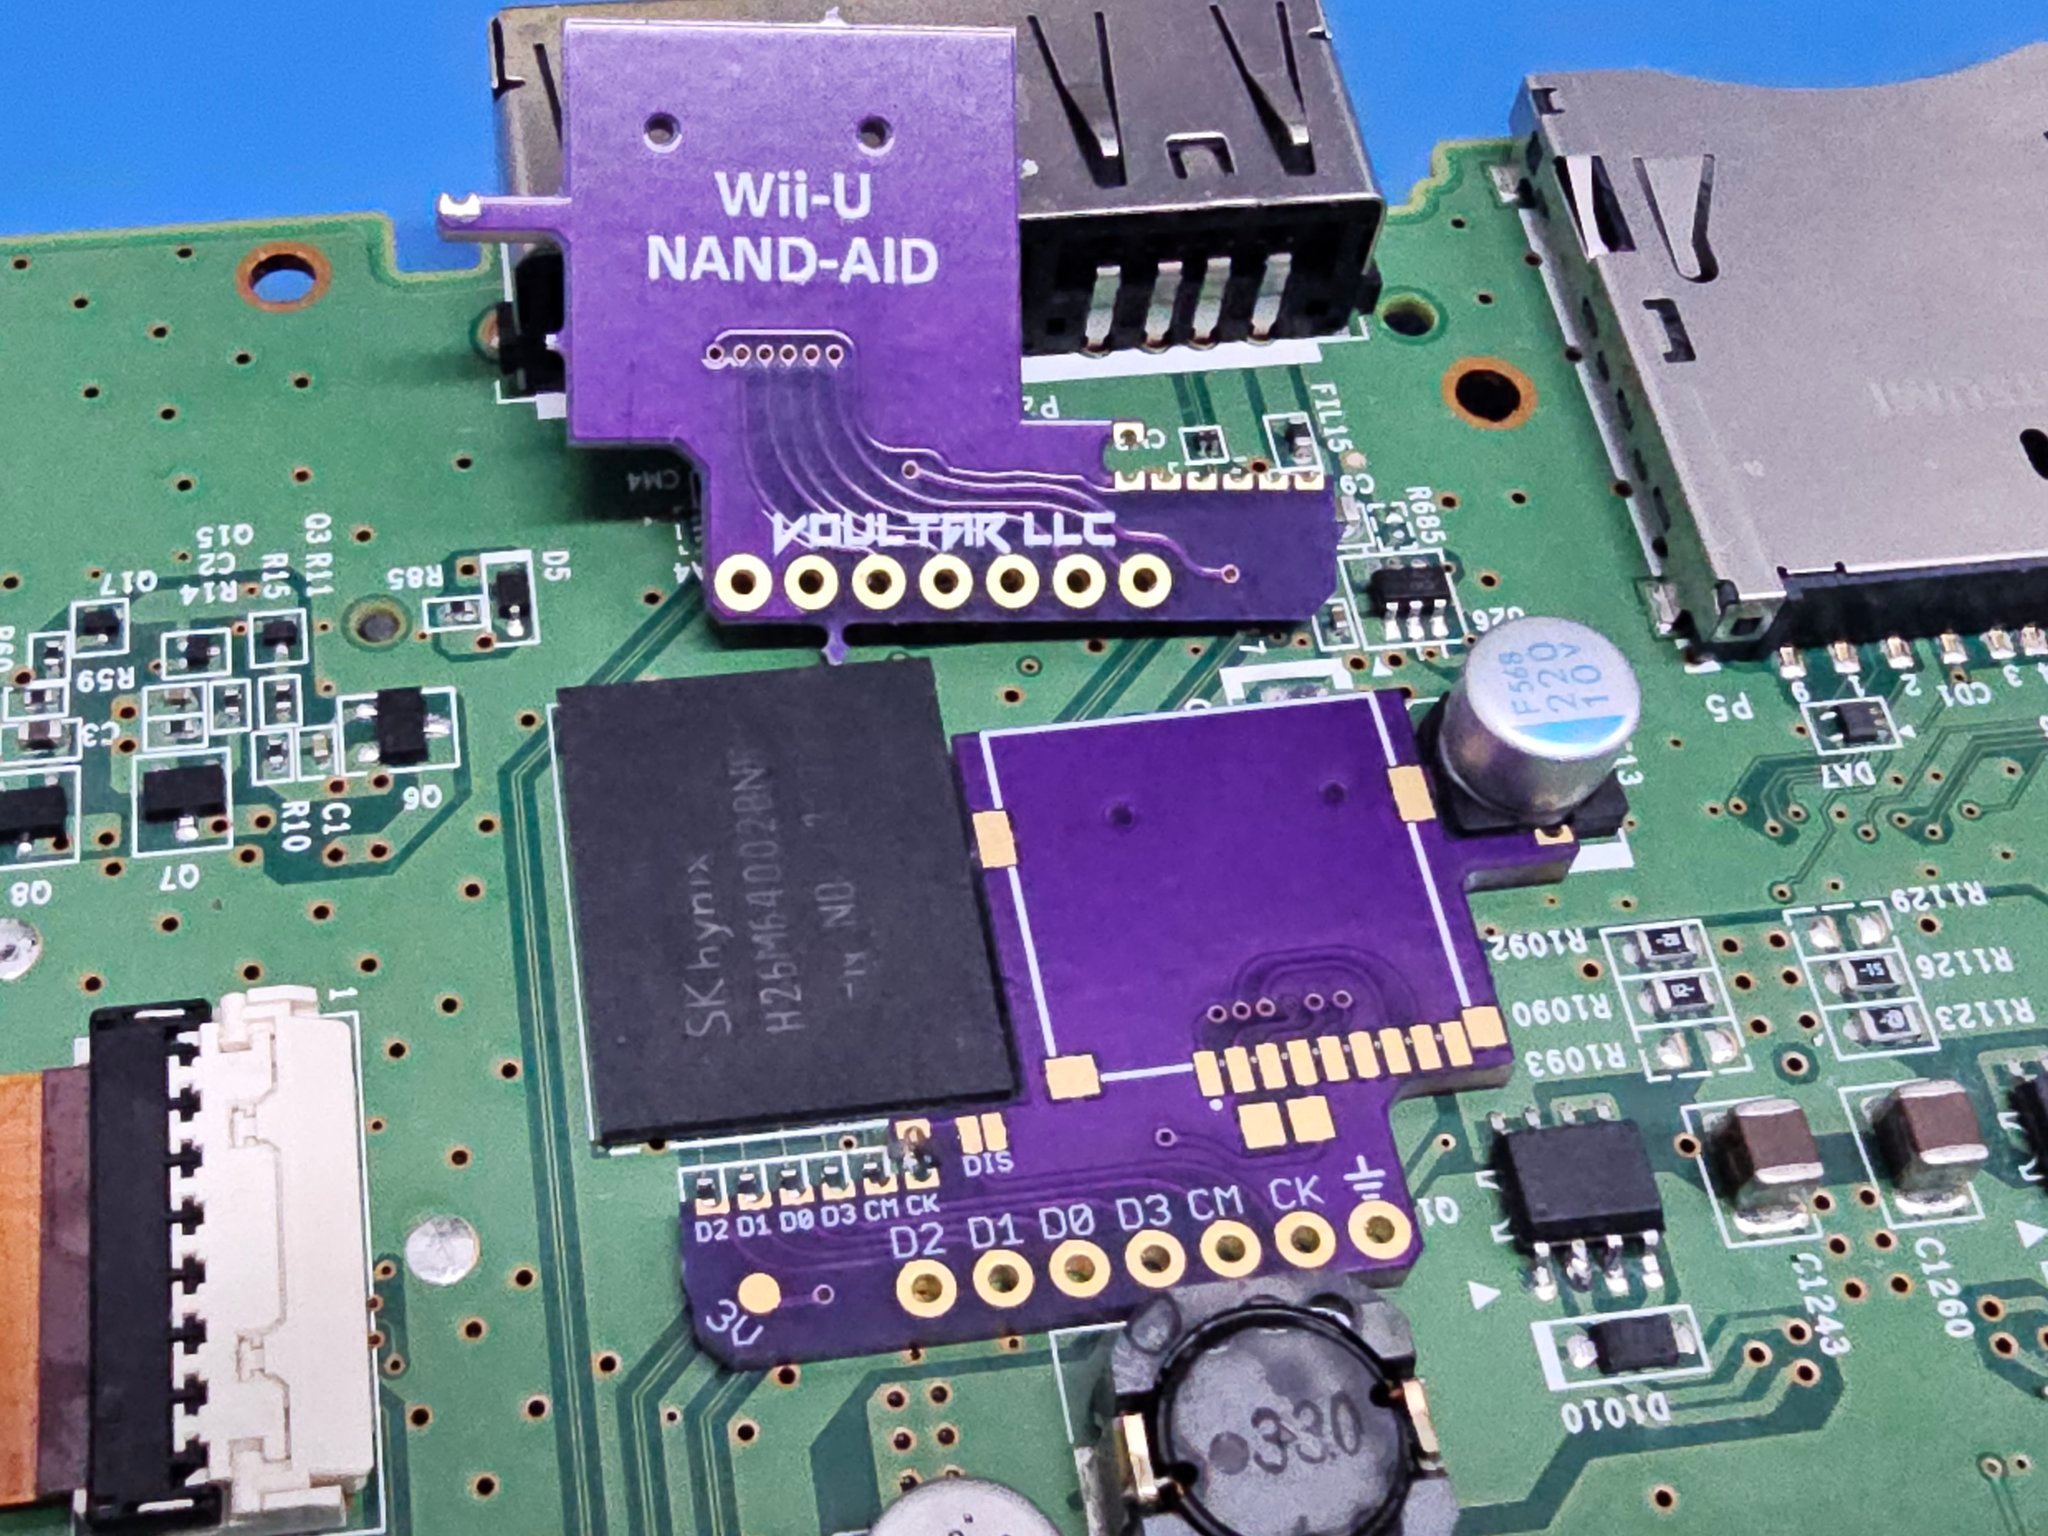 Wii-U NAND-AID - eMMC Recovery and Replacement Interposer Public Test |  GBAtemp.net - The Independent Video Game Community